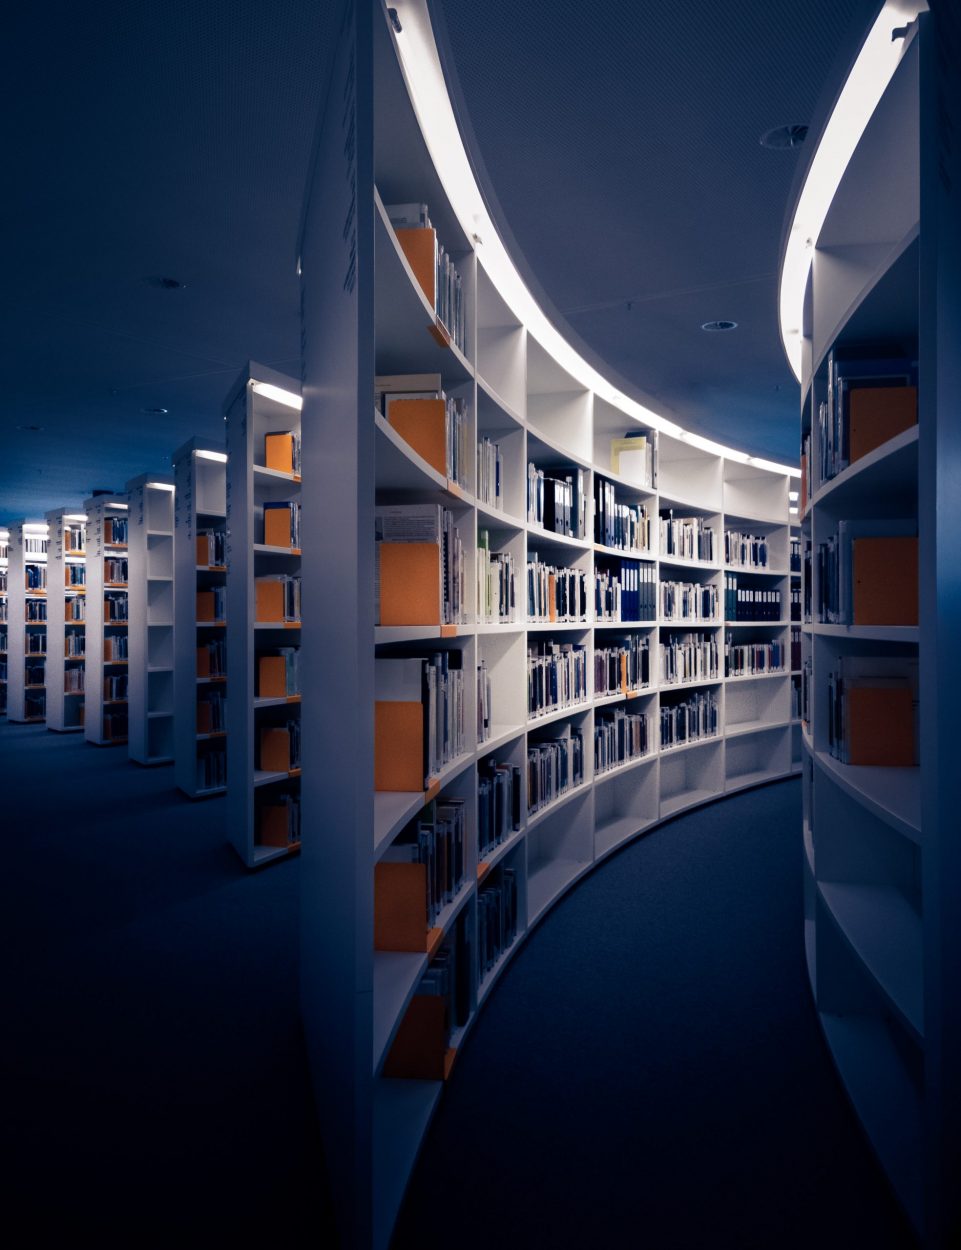 Futuristic curved library shelves filled with books and journals.